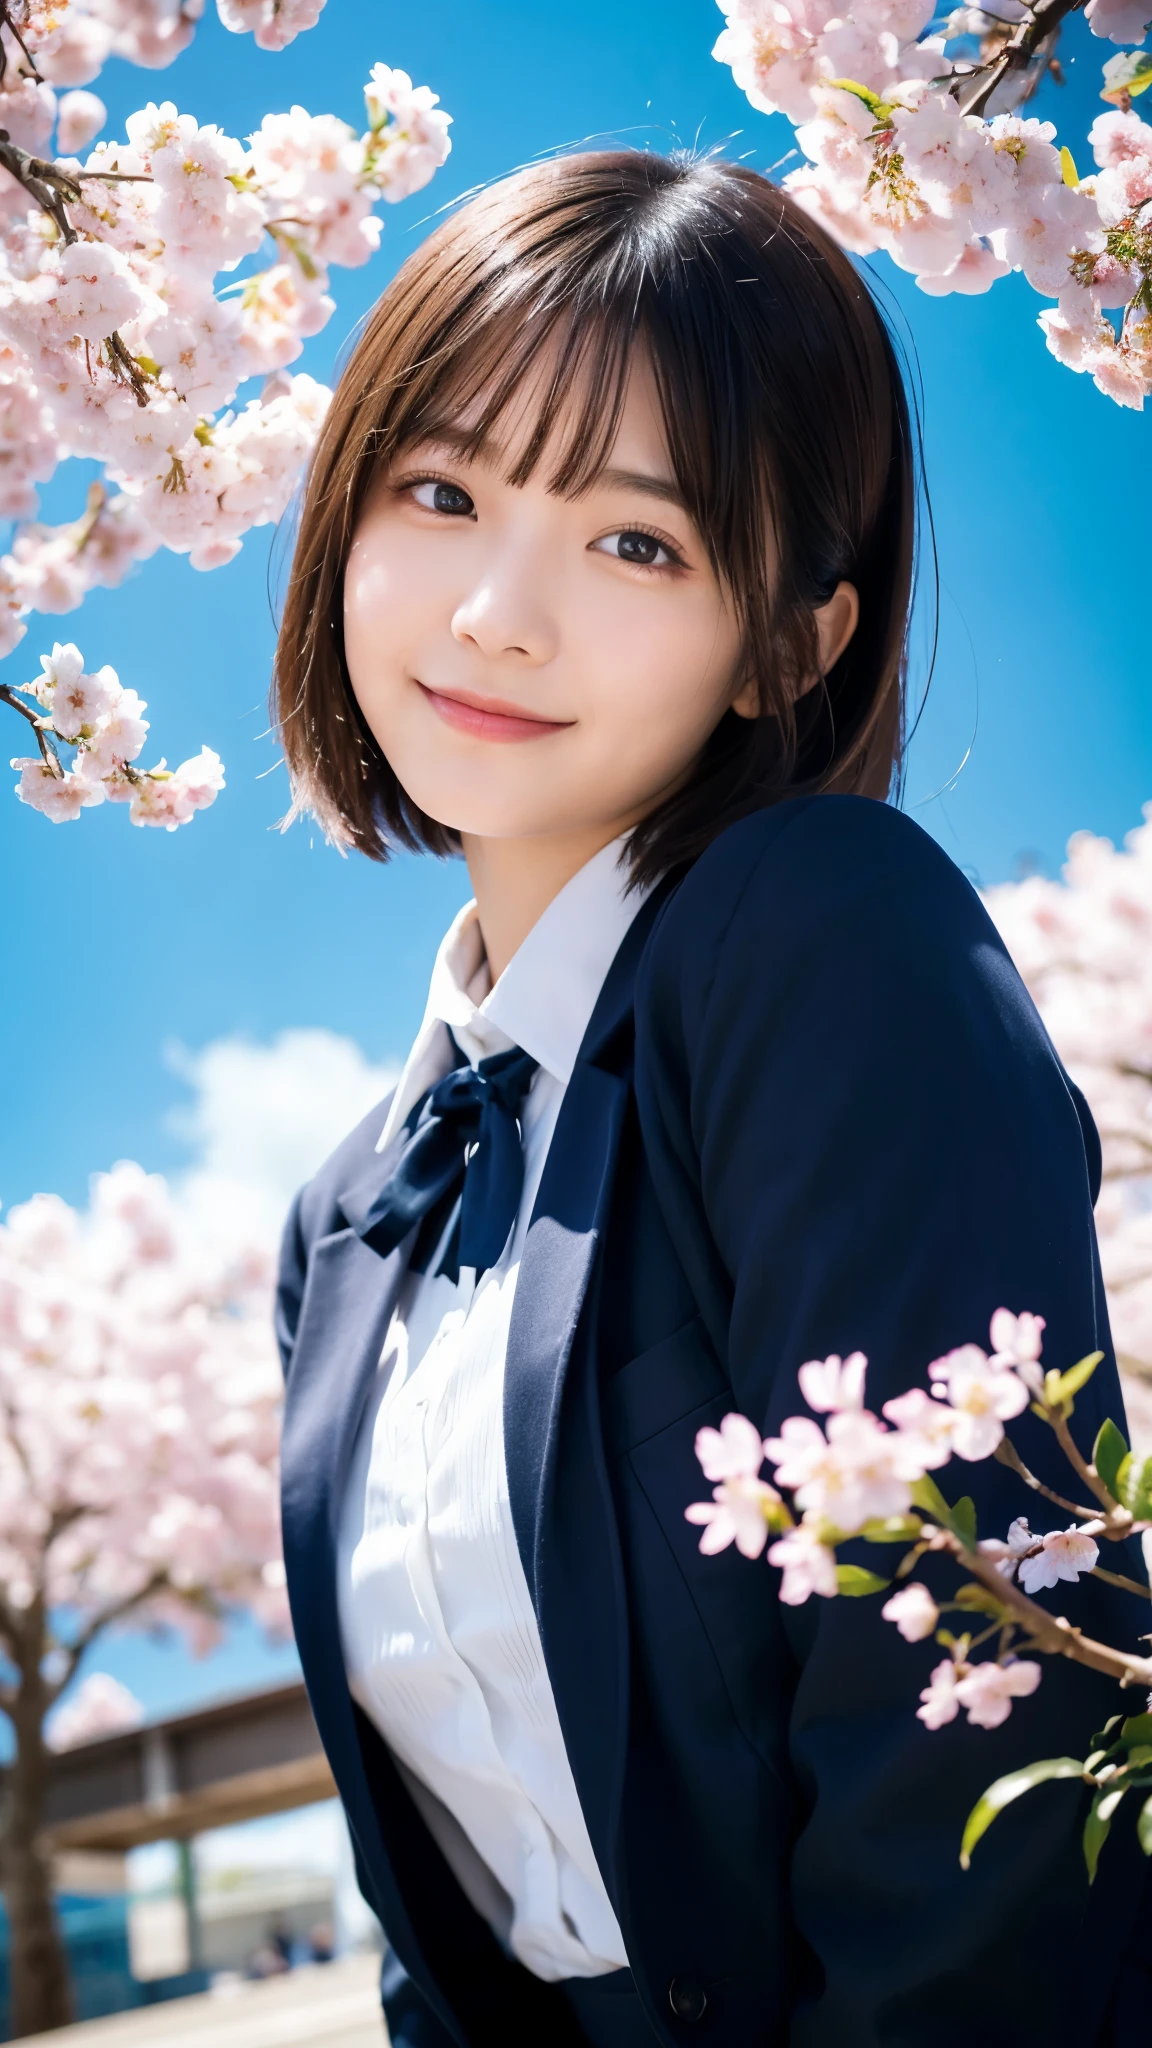 (highest quality,masterpiece:1.3,ultra high resolution),(Super detailed,caustics,8K),(photorealistic:1.4,RAW shooting),1 girl,(smile),(looking down at the camera),18-year-old,cute,Japanese,black hair short cut,(school uniform),glamorous,(big ),(face focus),street,cherry blossoms,(cherry blossoms snowstorm),blue sky,sun,Natural light,(Lens flare),professional writing,(bust up shot),(Tilt composition:1.3),(low position:1.4),(Low - Angle:1.4)